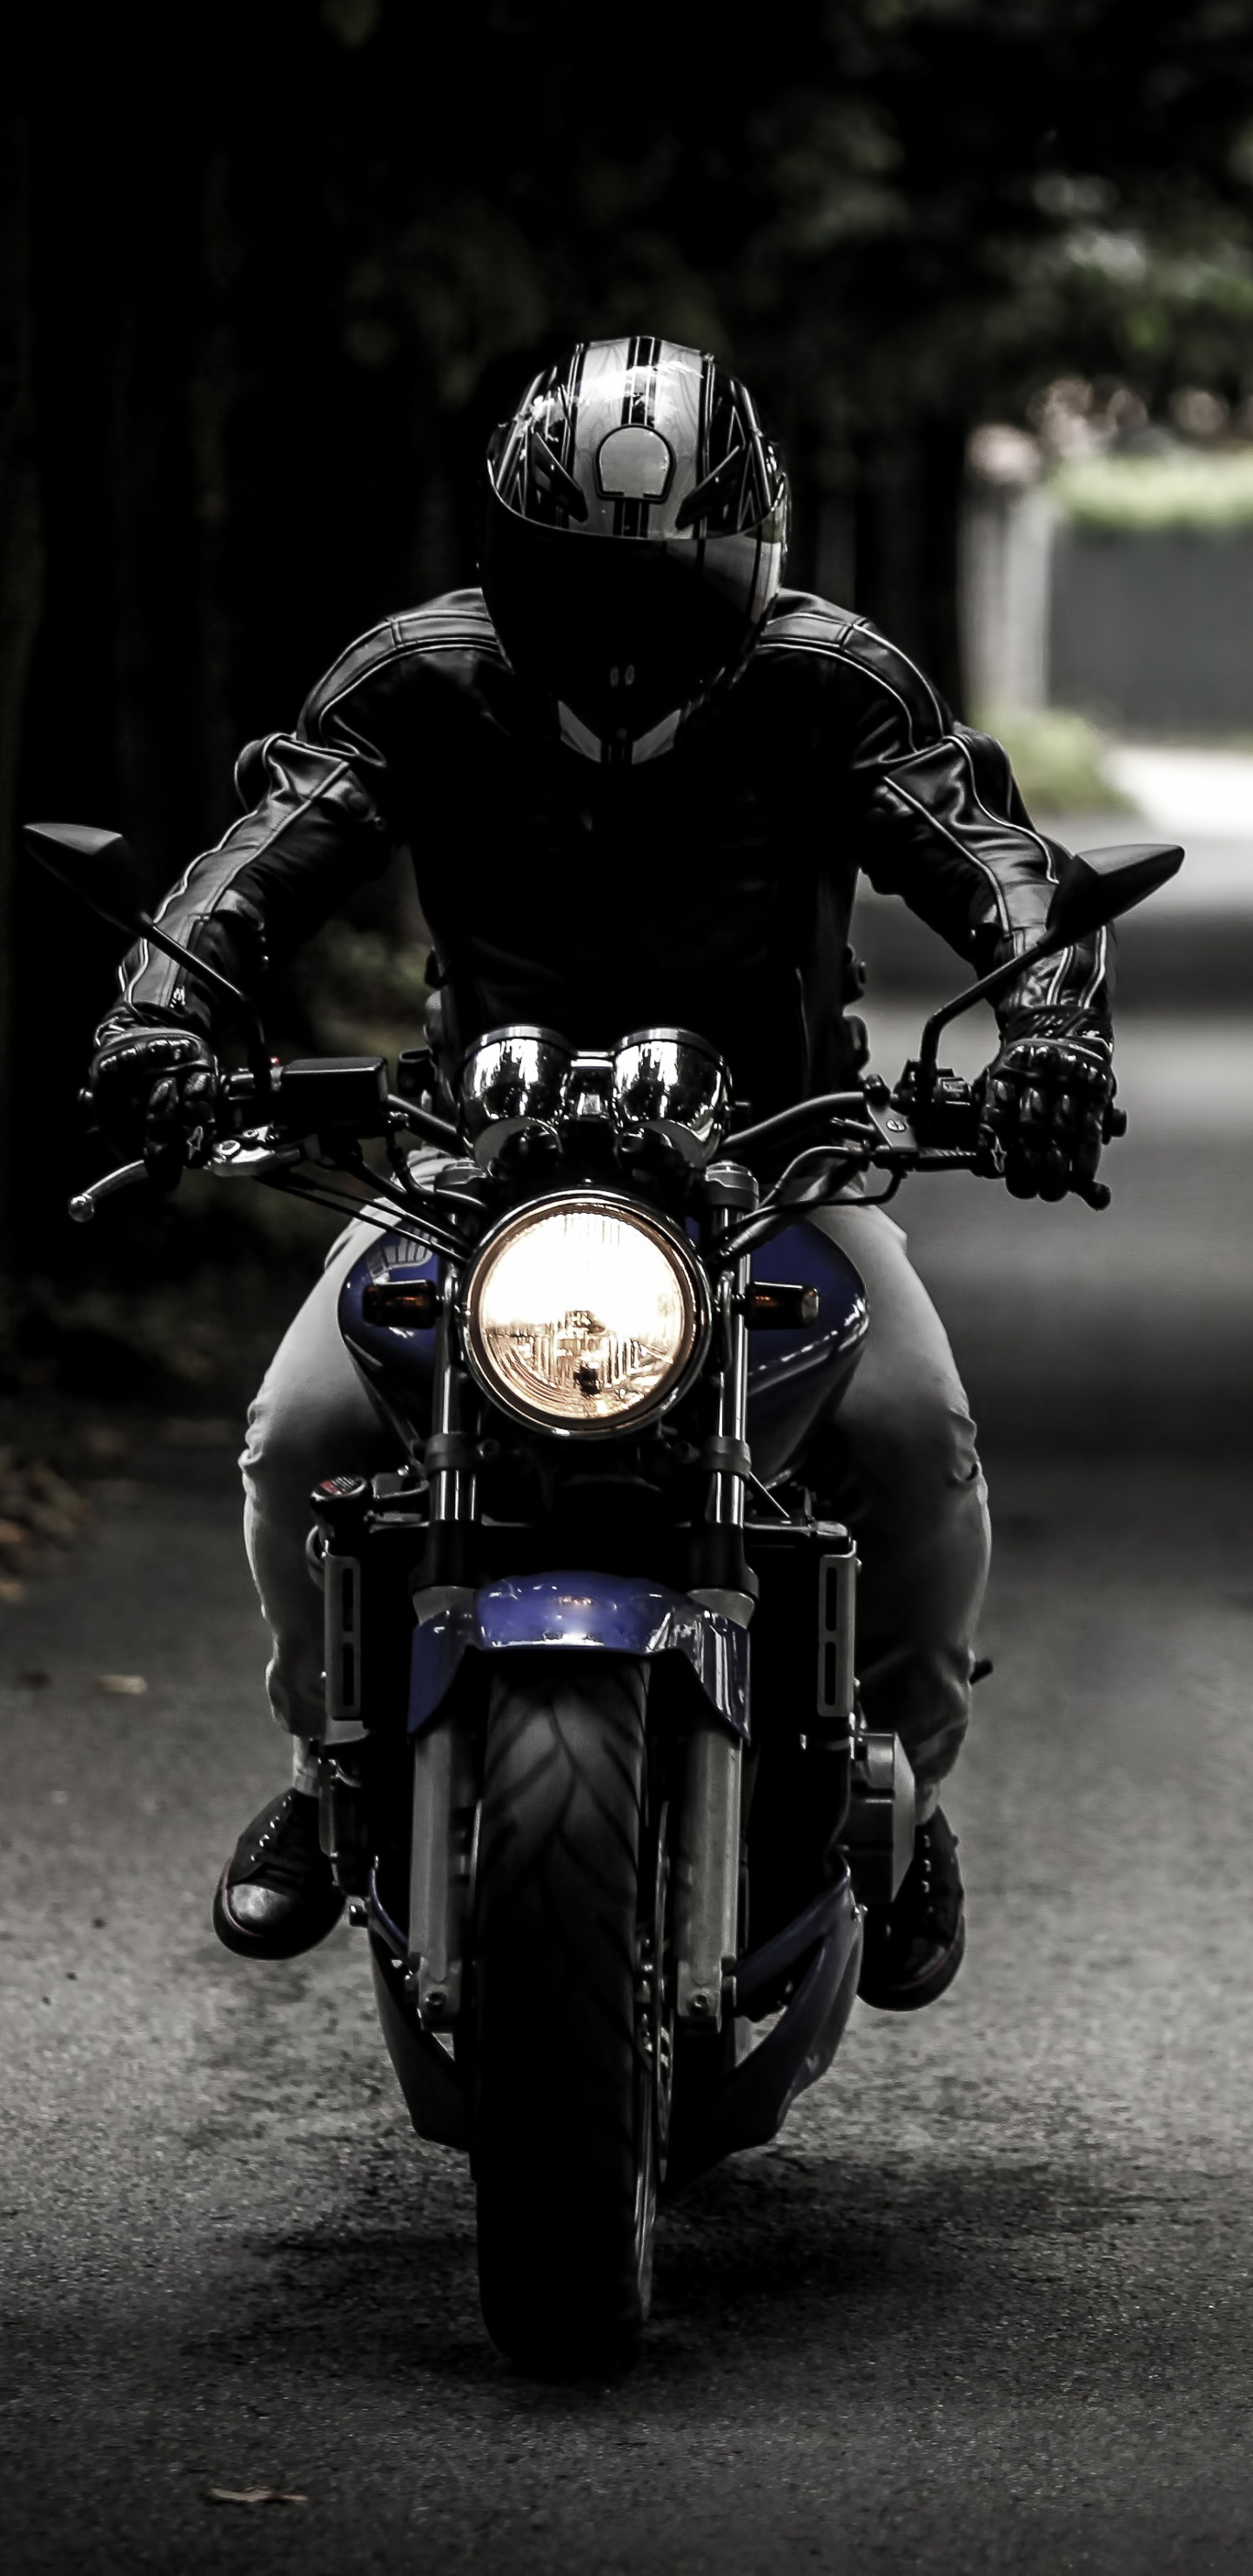 Man in Black Helmet Riding Motorcycle on Road During Daytime. Wallpaper in 1440x2960 Resolution